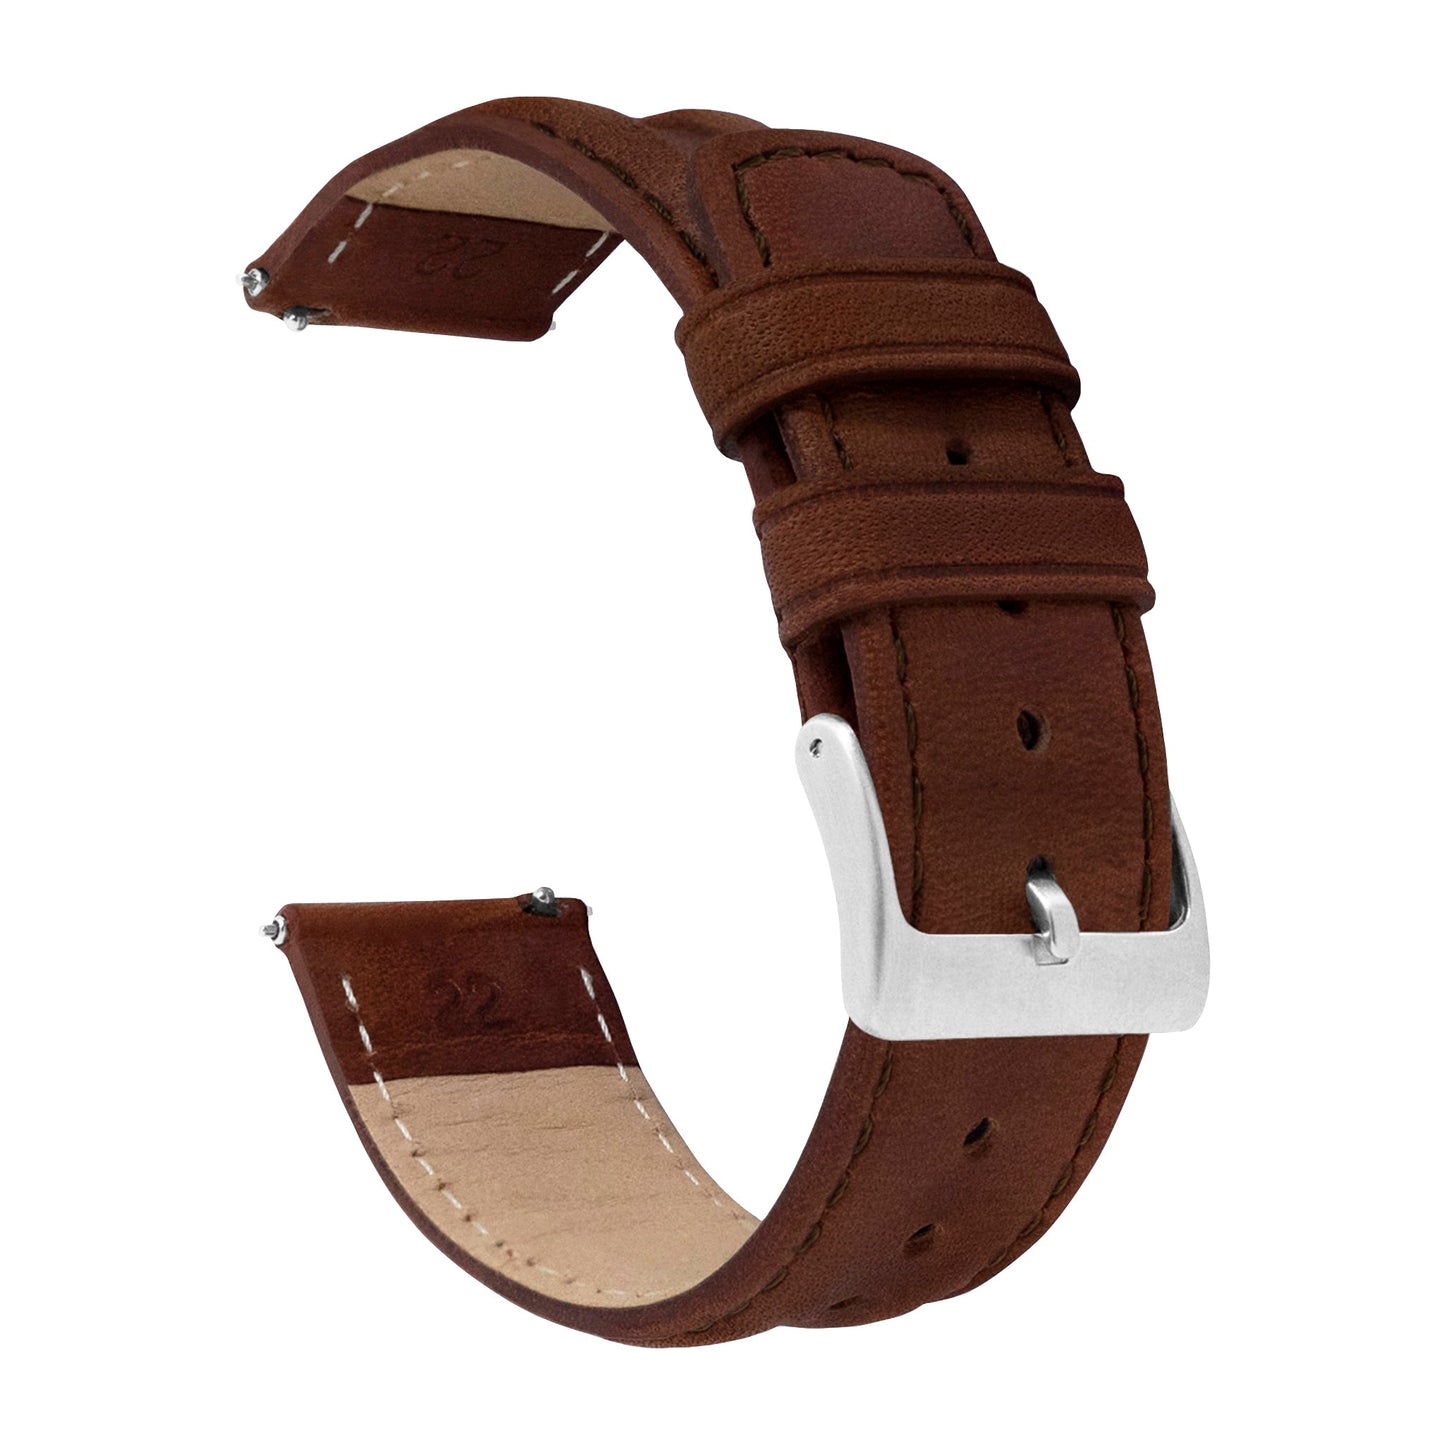 Samsung Galaxy Watch | Classic Horween Leather | Chocolate Brown - Barton Watch Bands